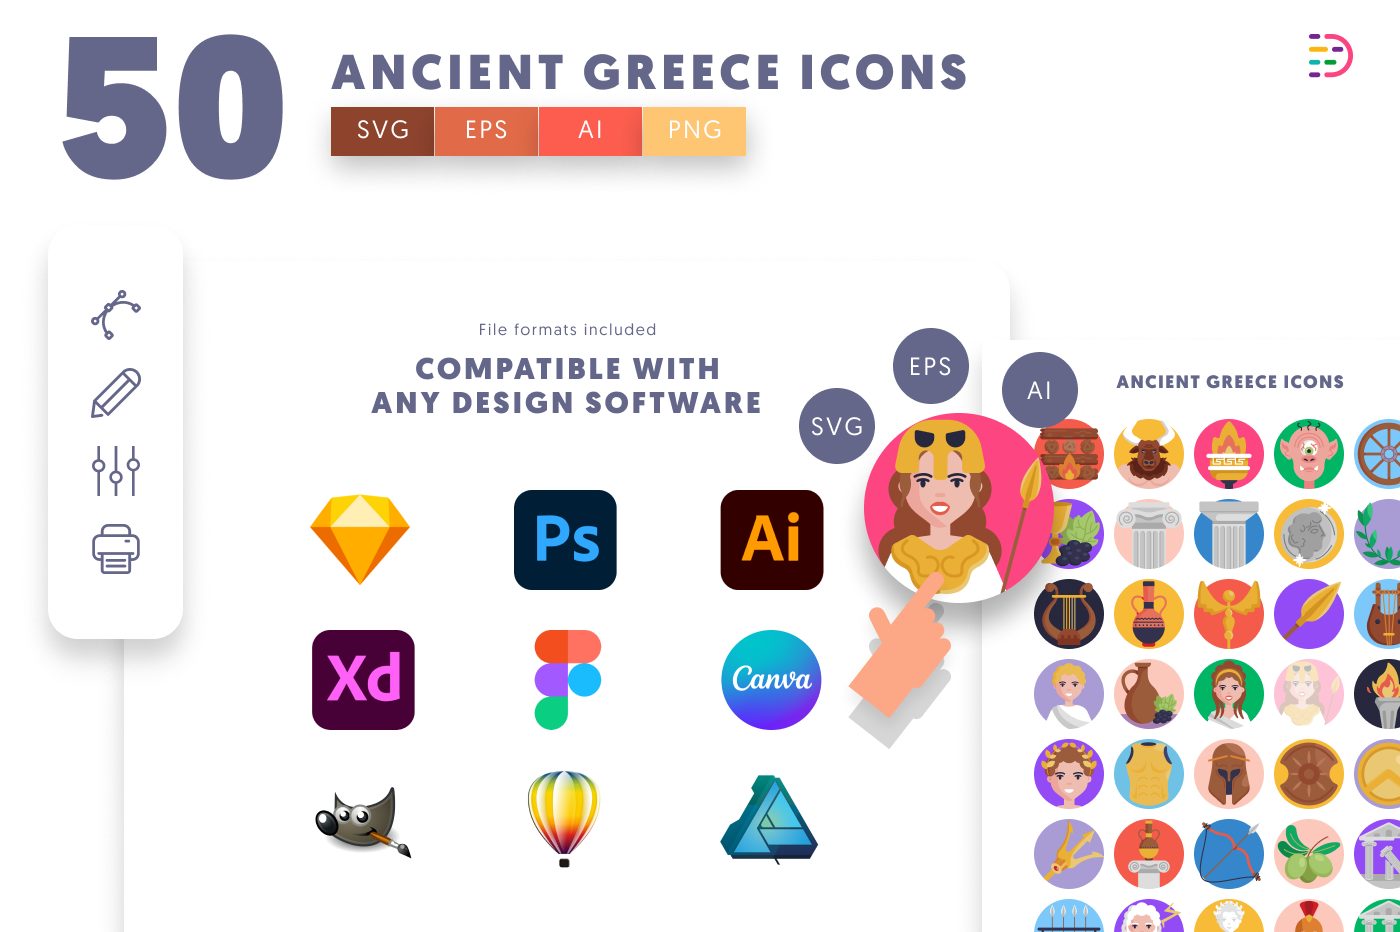 50-Ancient Greece-Icons